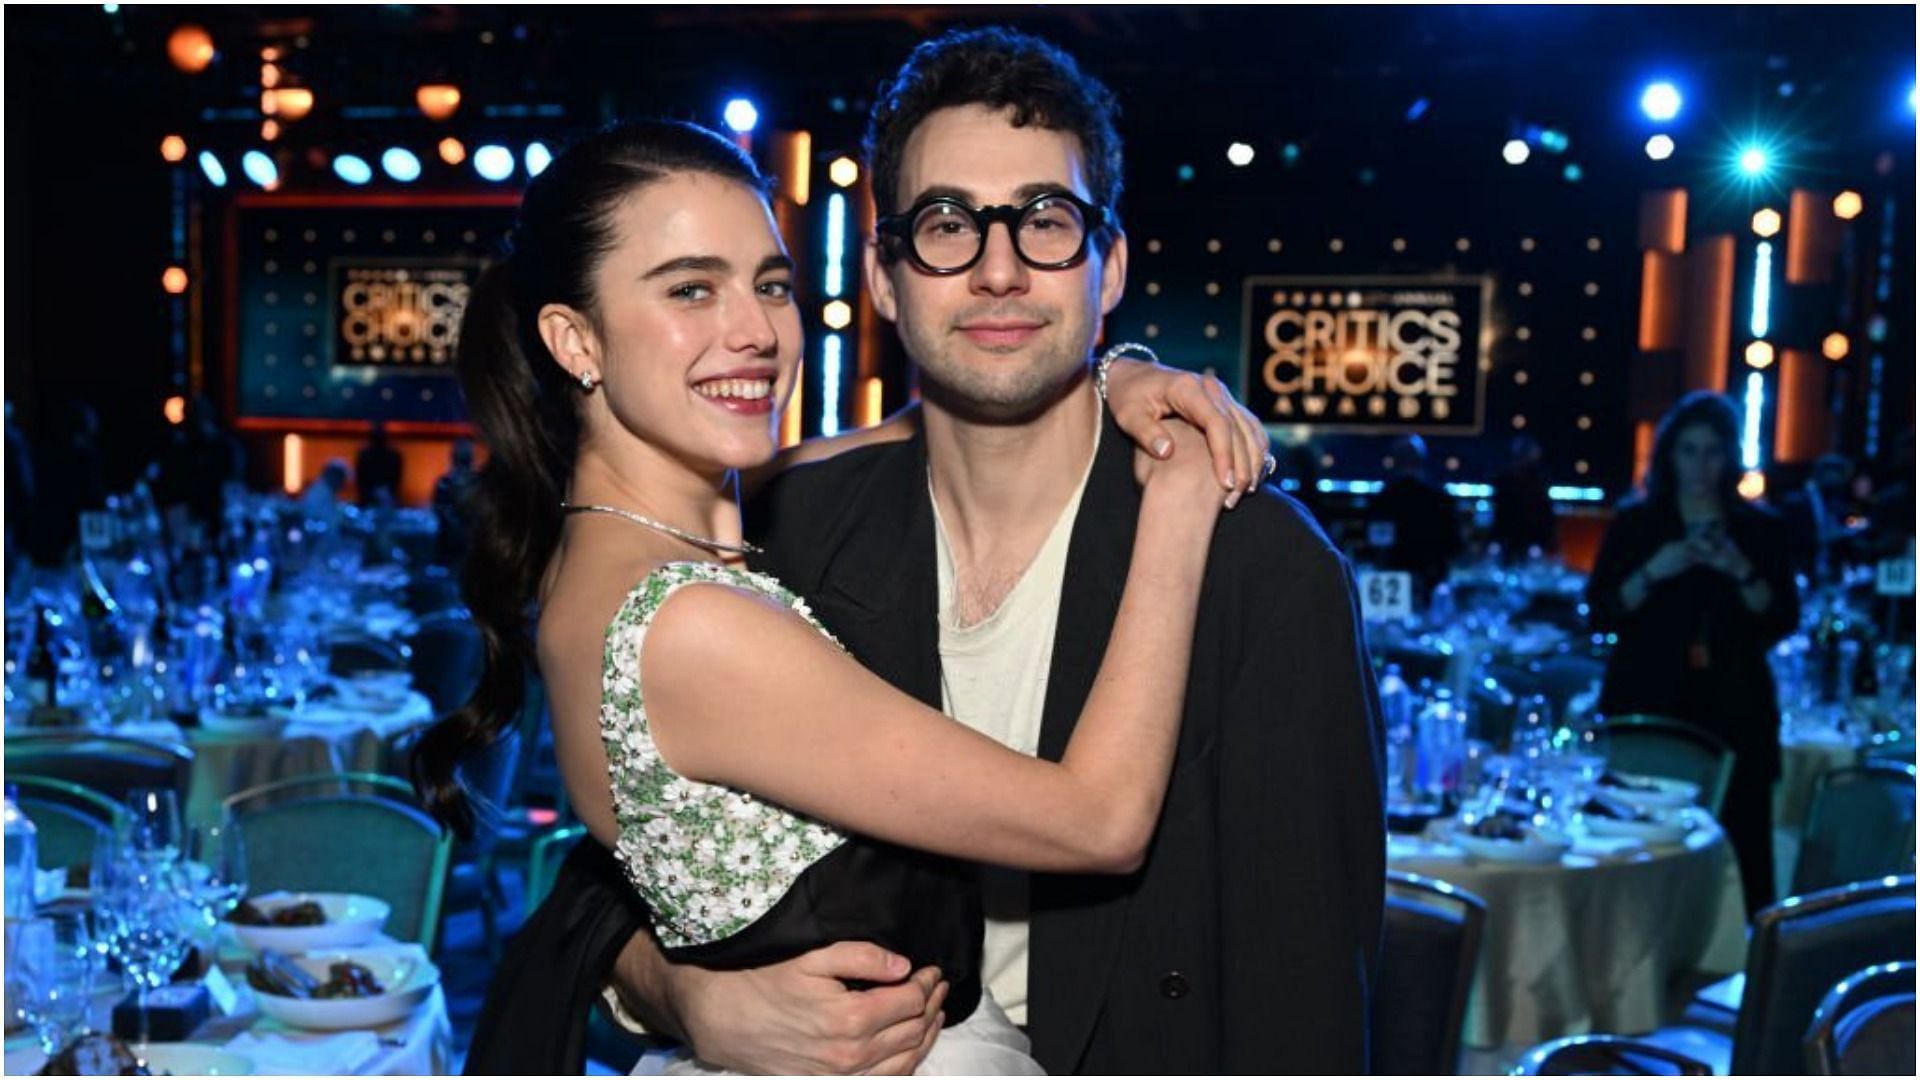 Margaret Qualley and Jack Antonoff made their first public appearance together (Image via Michael Kovac/Getty Images)